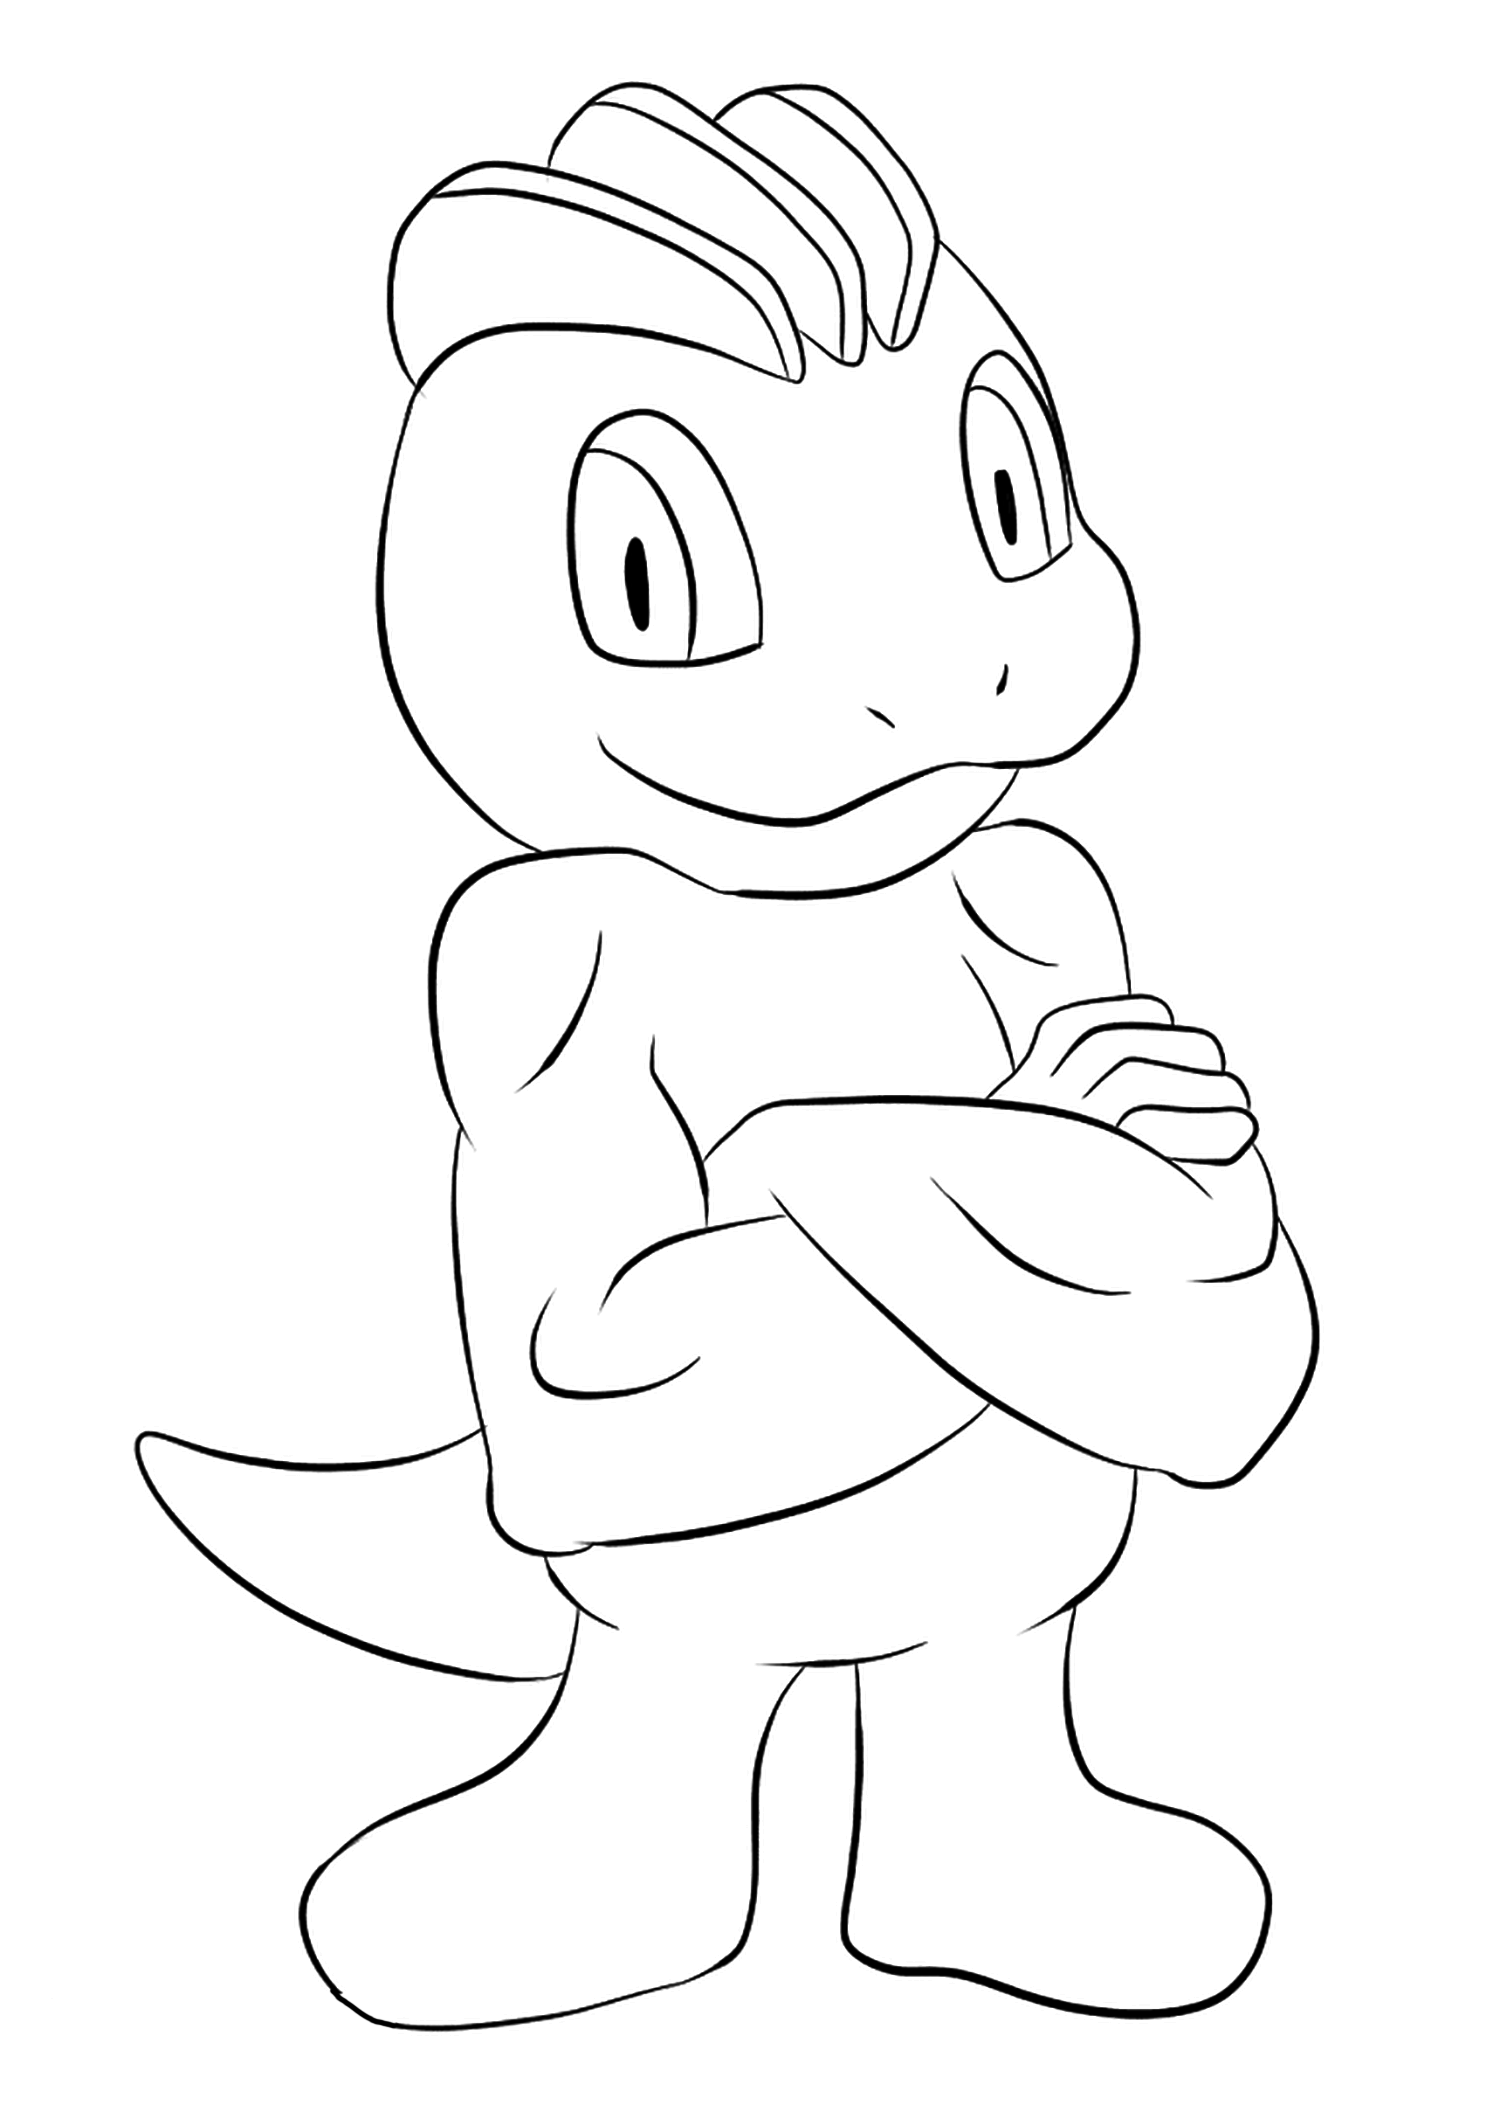 Machop (No.66). Machop Coloring page, Generation I Pokemon of type FightingOriginal image credit: Pokemon linearts by Lilly Gerbil on Deviantart.Permission:  All rights reserved © Pokemon company and Ken Sugimori.